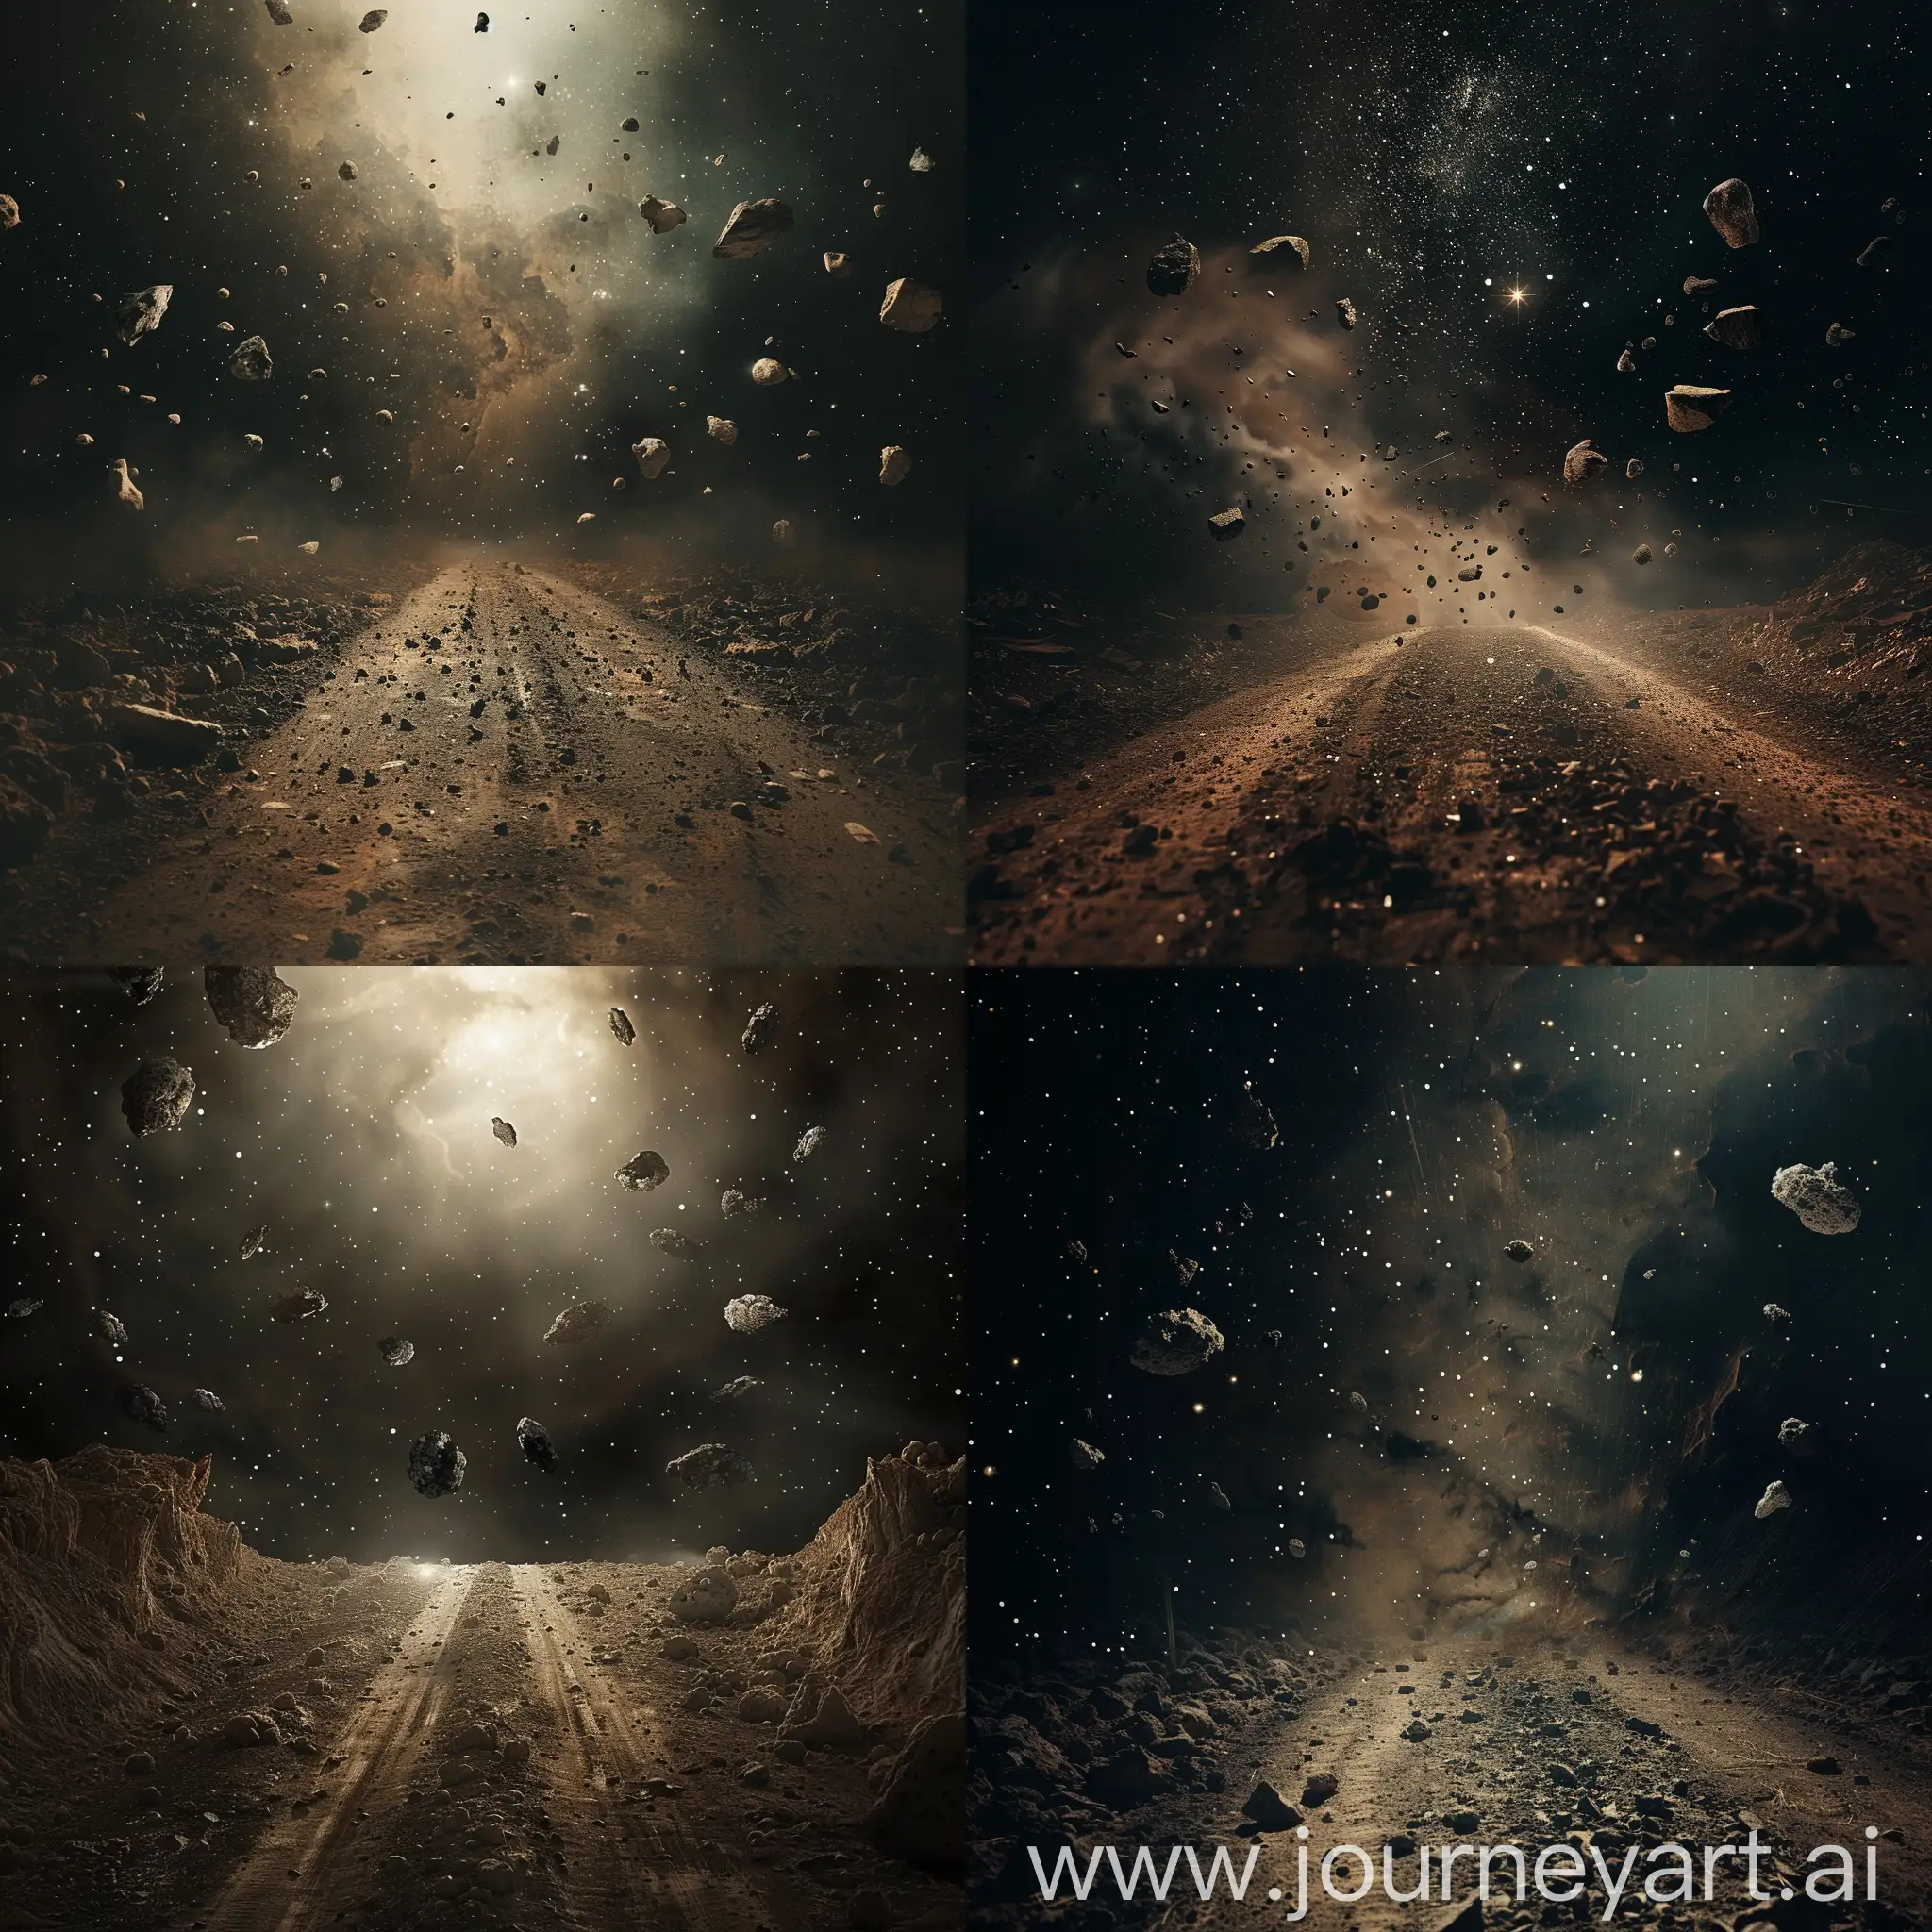 Mystical-Journey-through-Space-Small-White-Star-and-Flying-Rocks